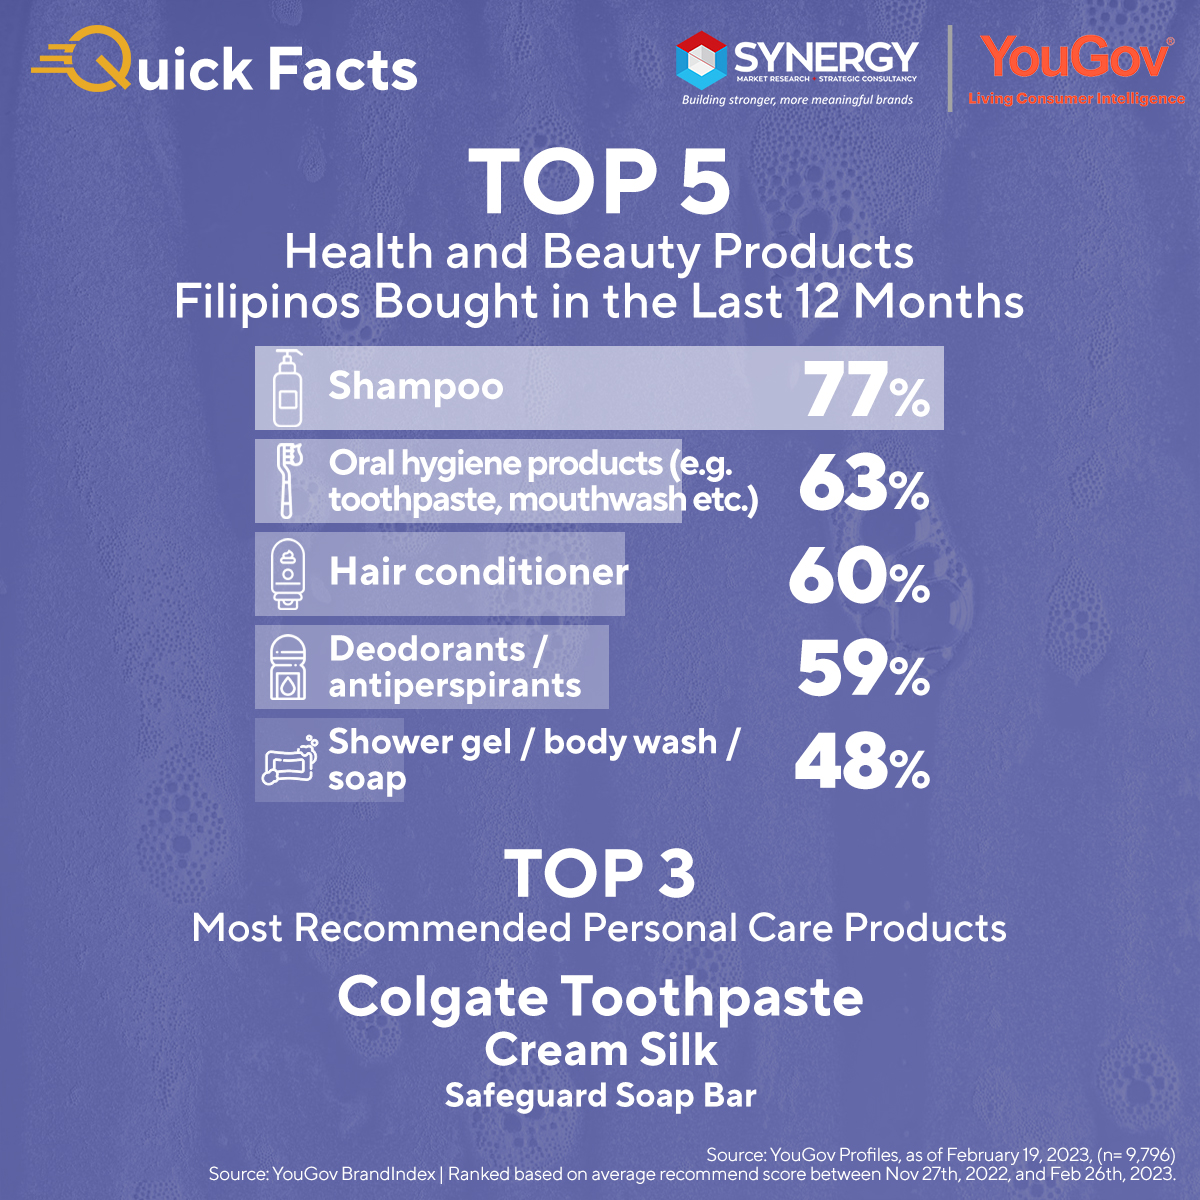 Quick Facts 2023 – Health and Beauty Products